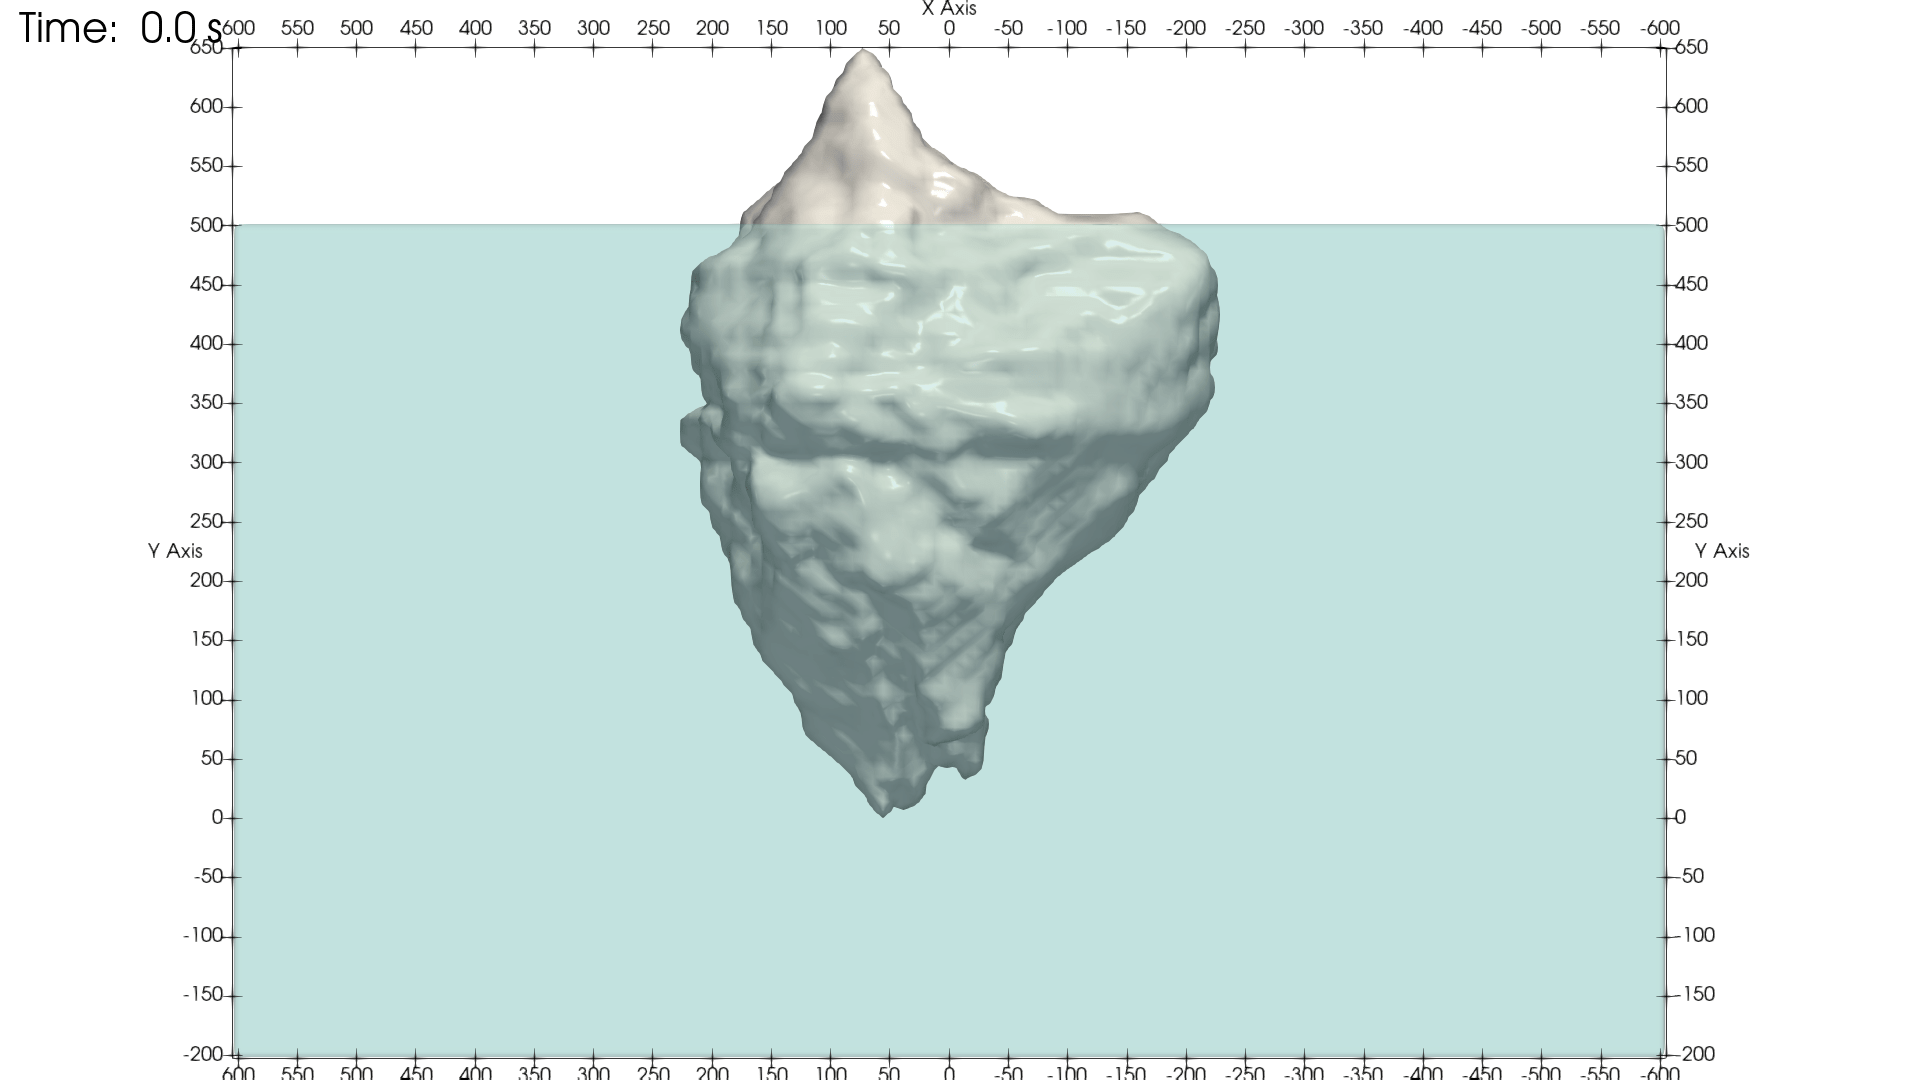 Figure 1: Initial position of the iceberg. Axes show X and Y coordinates in units of meters. Note that the gravity is acting in the negative Y direction in this geometry.